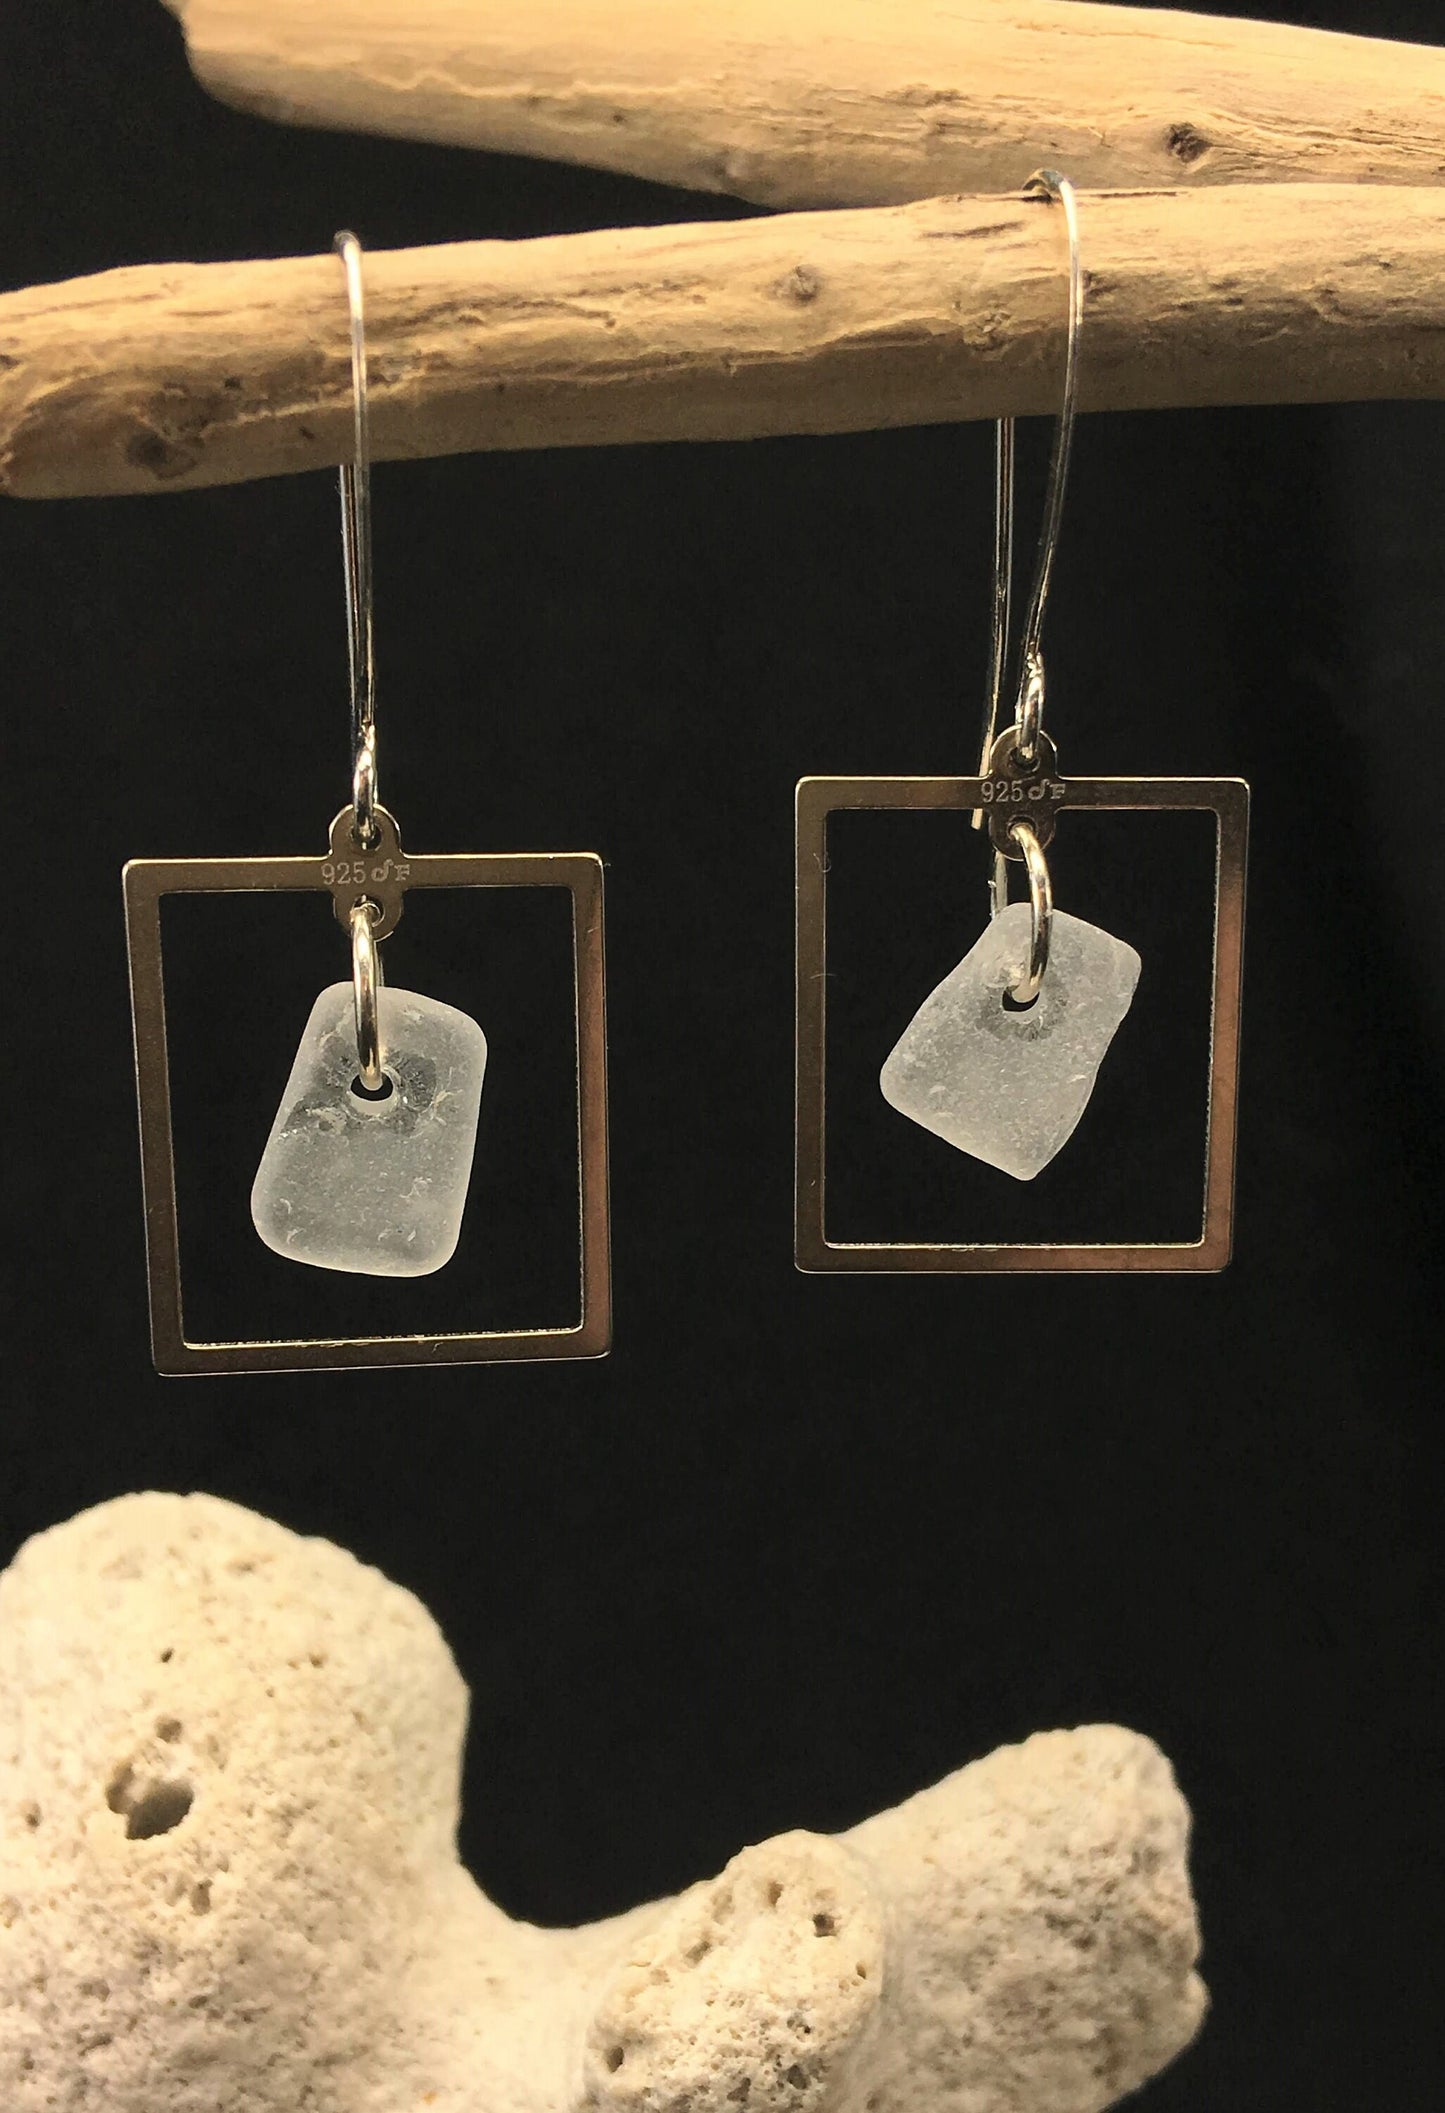 Framed! Earrings with white sea glass from Cape Breton, Nova Scotia, Canada framed in sterling silver on a nickle-free hook